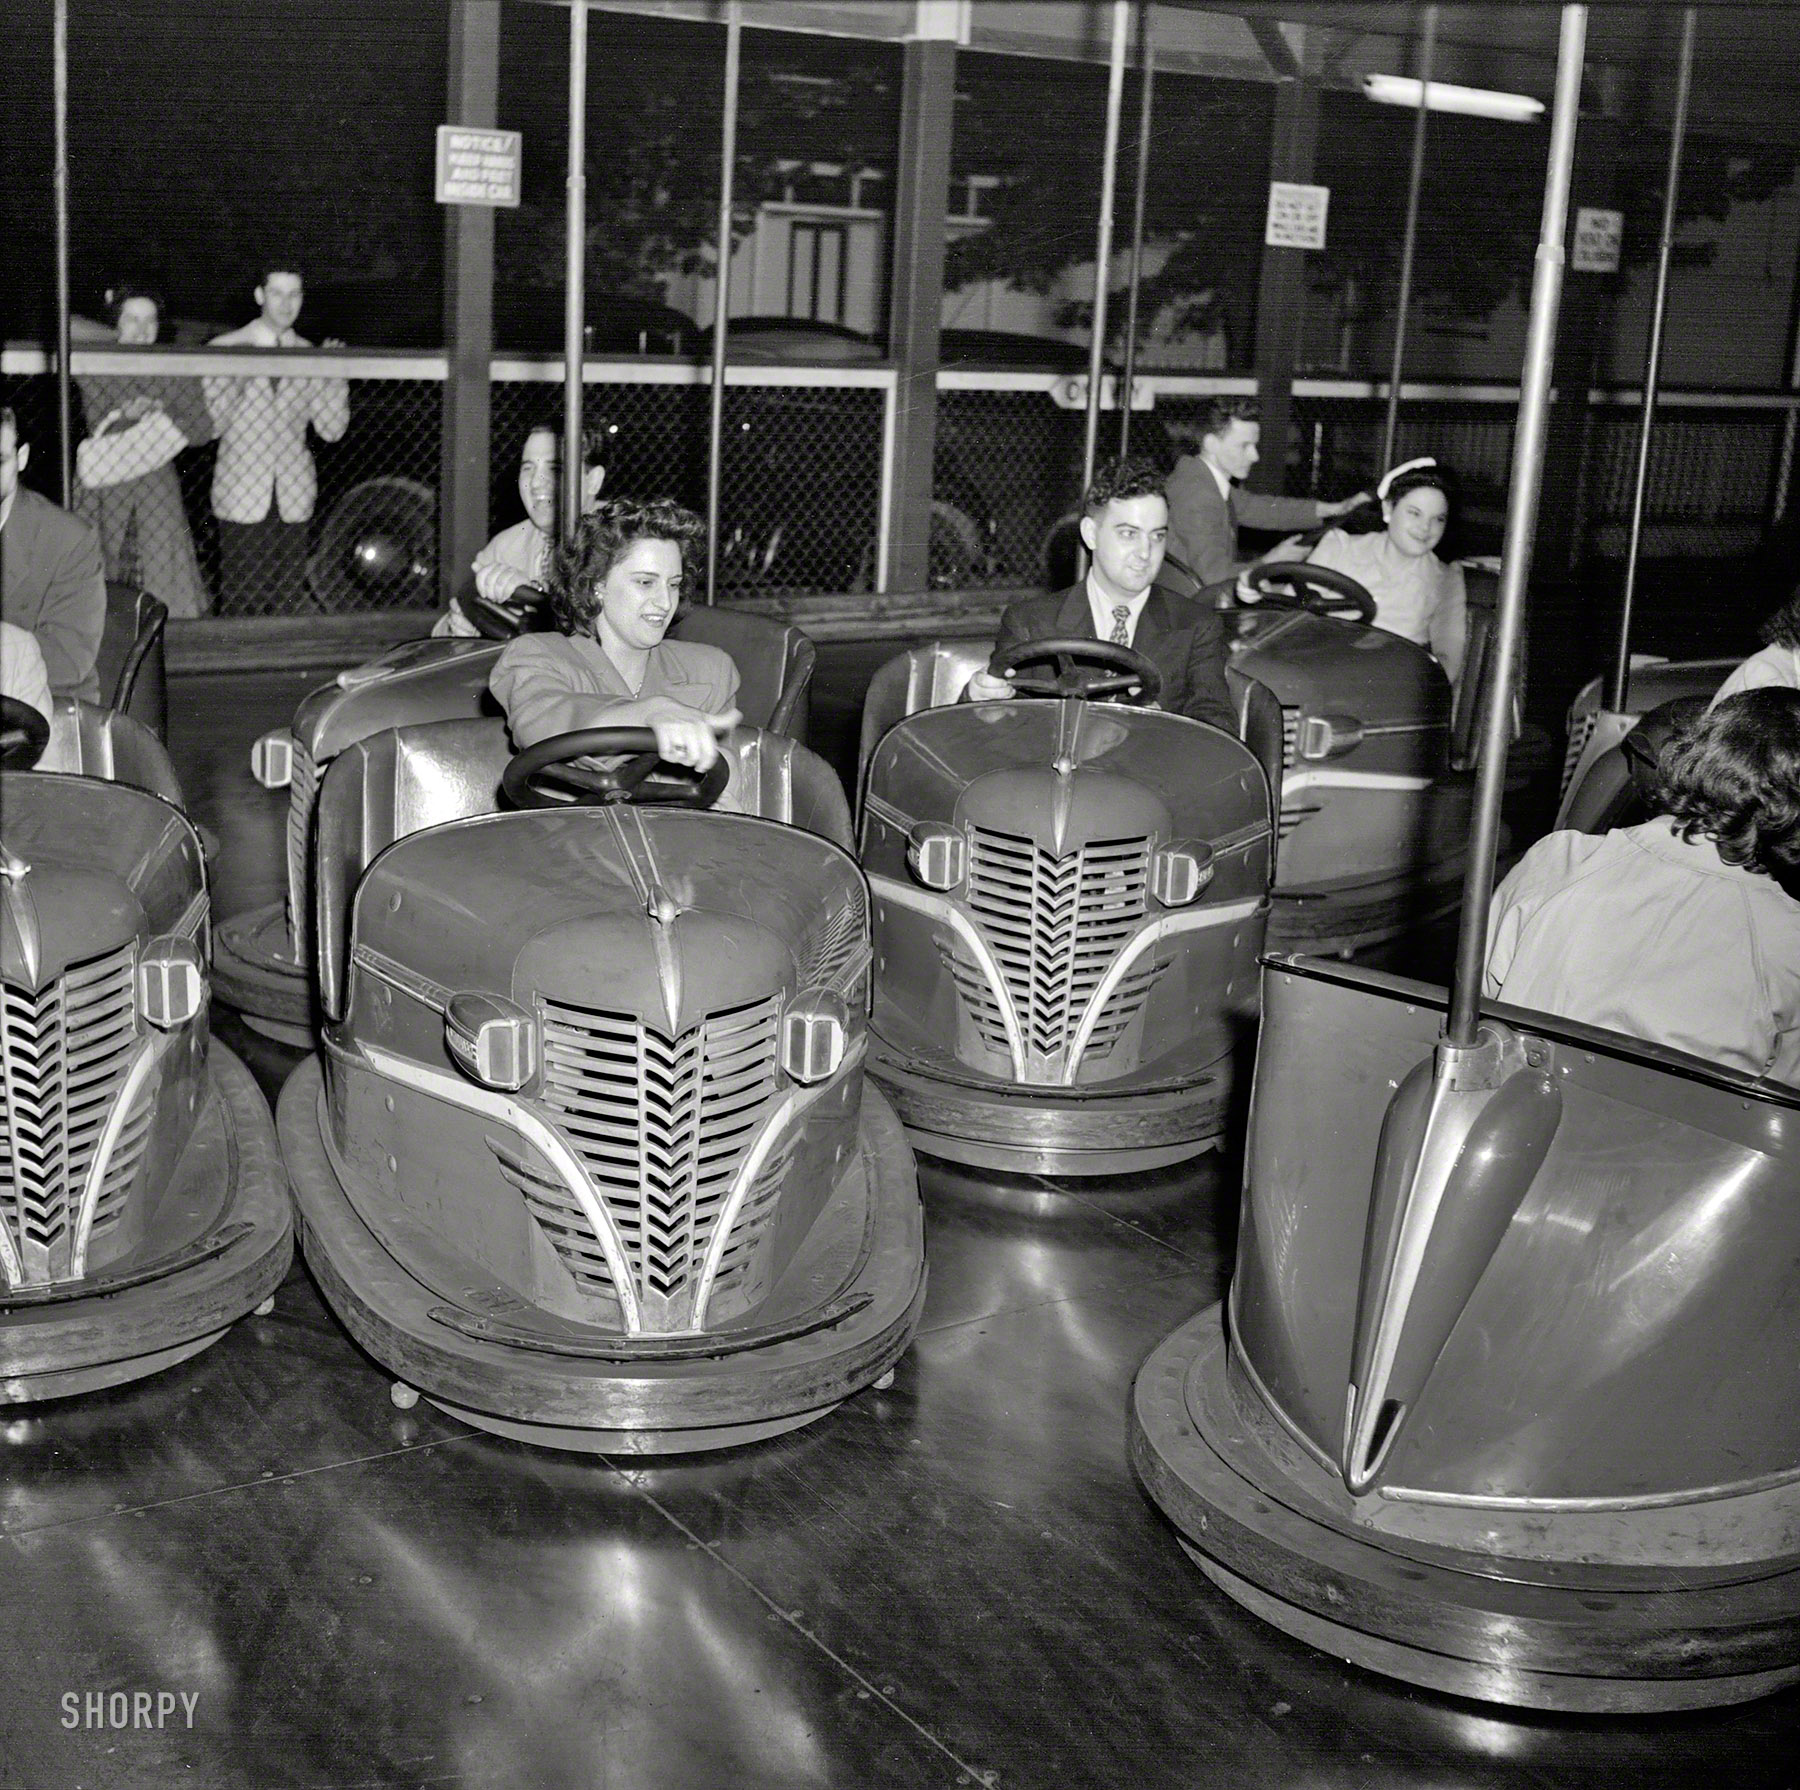 May 1942. "Southington, Connecticut. Amusement park." With a dress code. Photo by Fenno Jacobs for the Office of War Information. View full size.